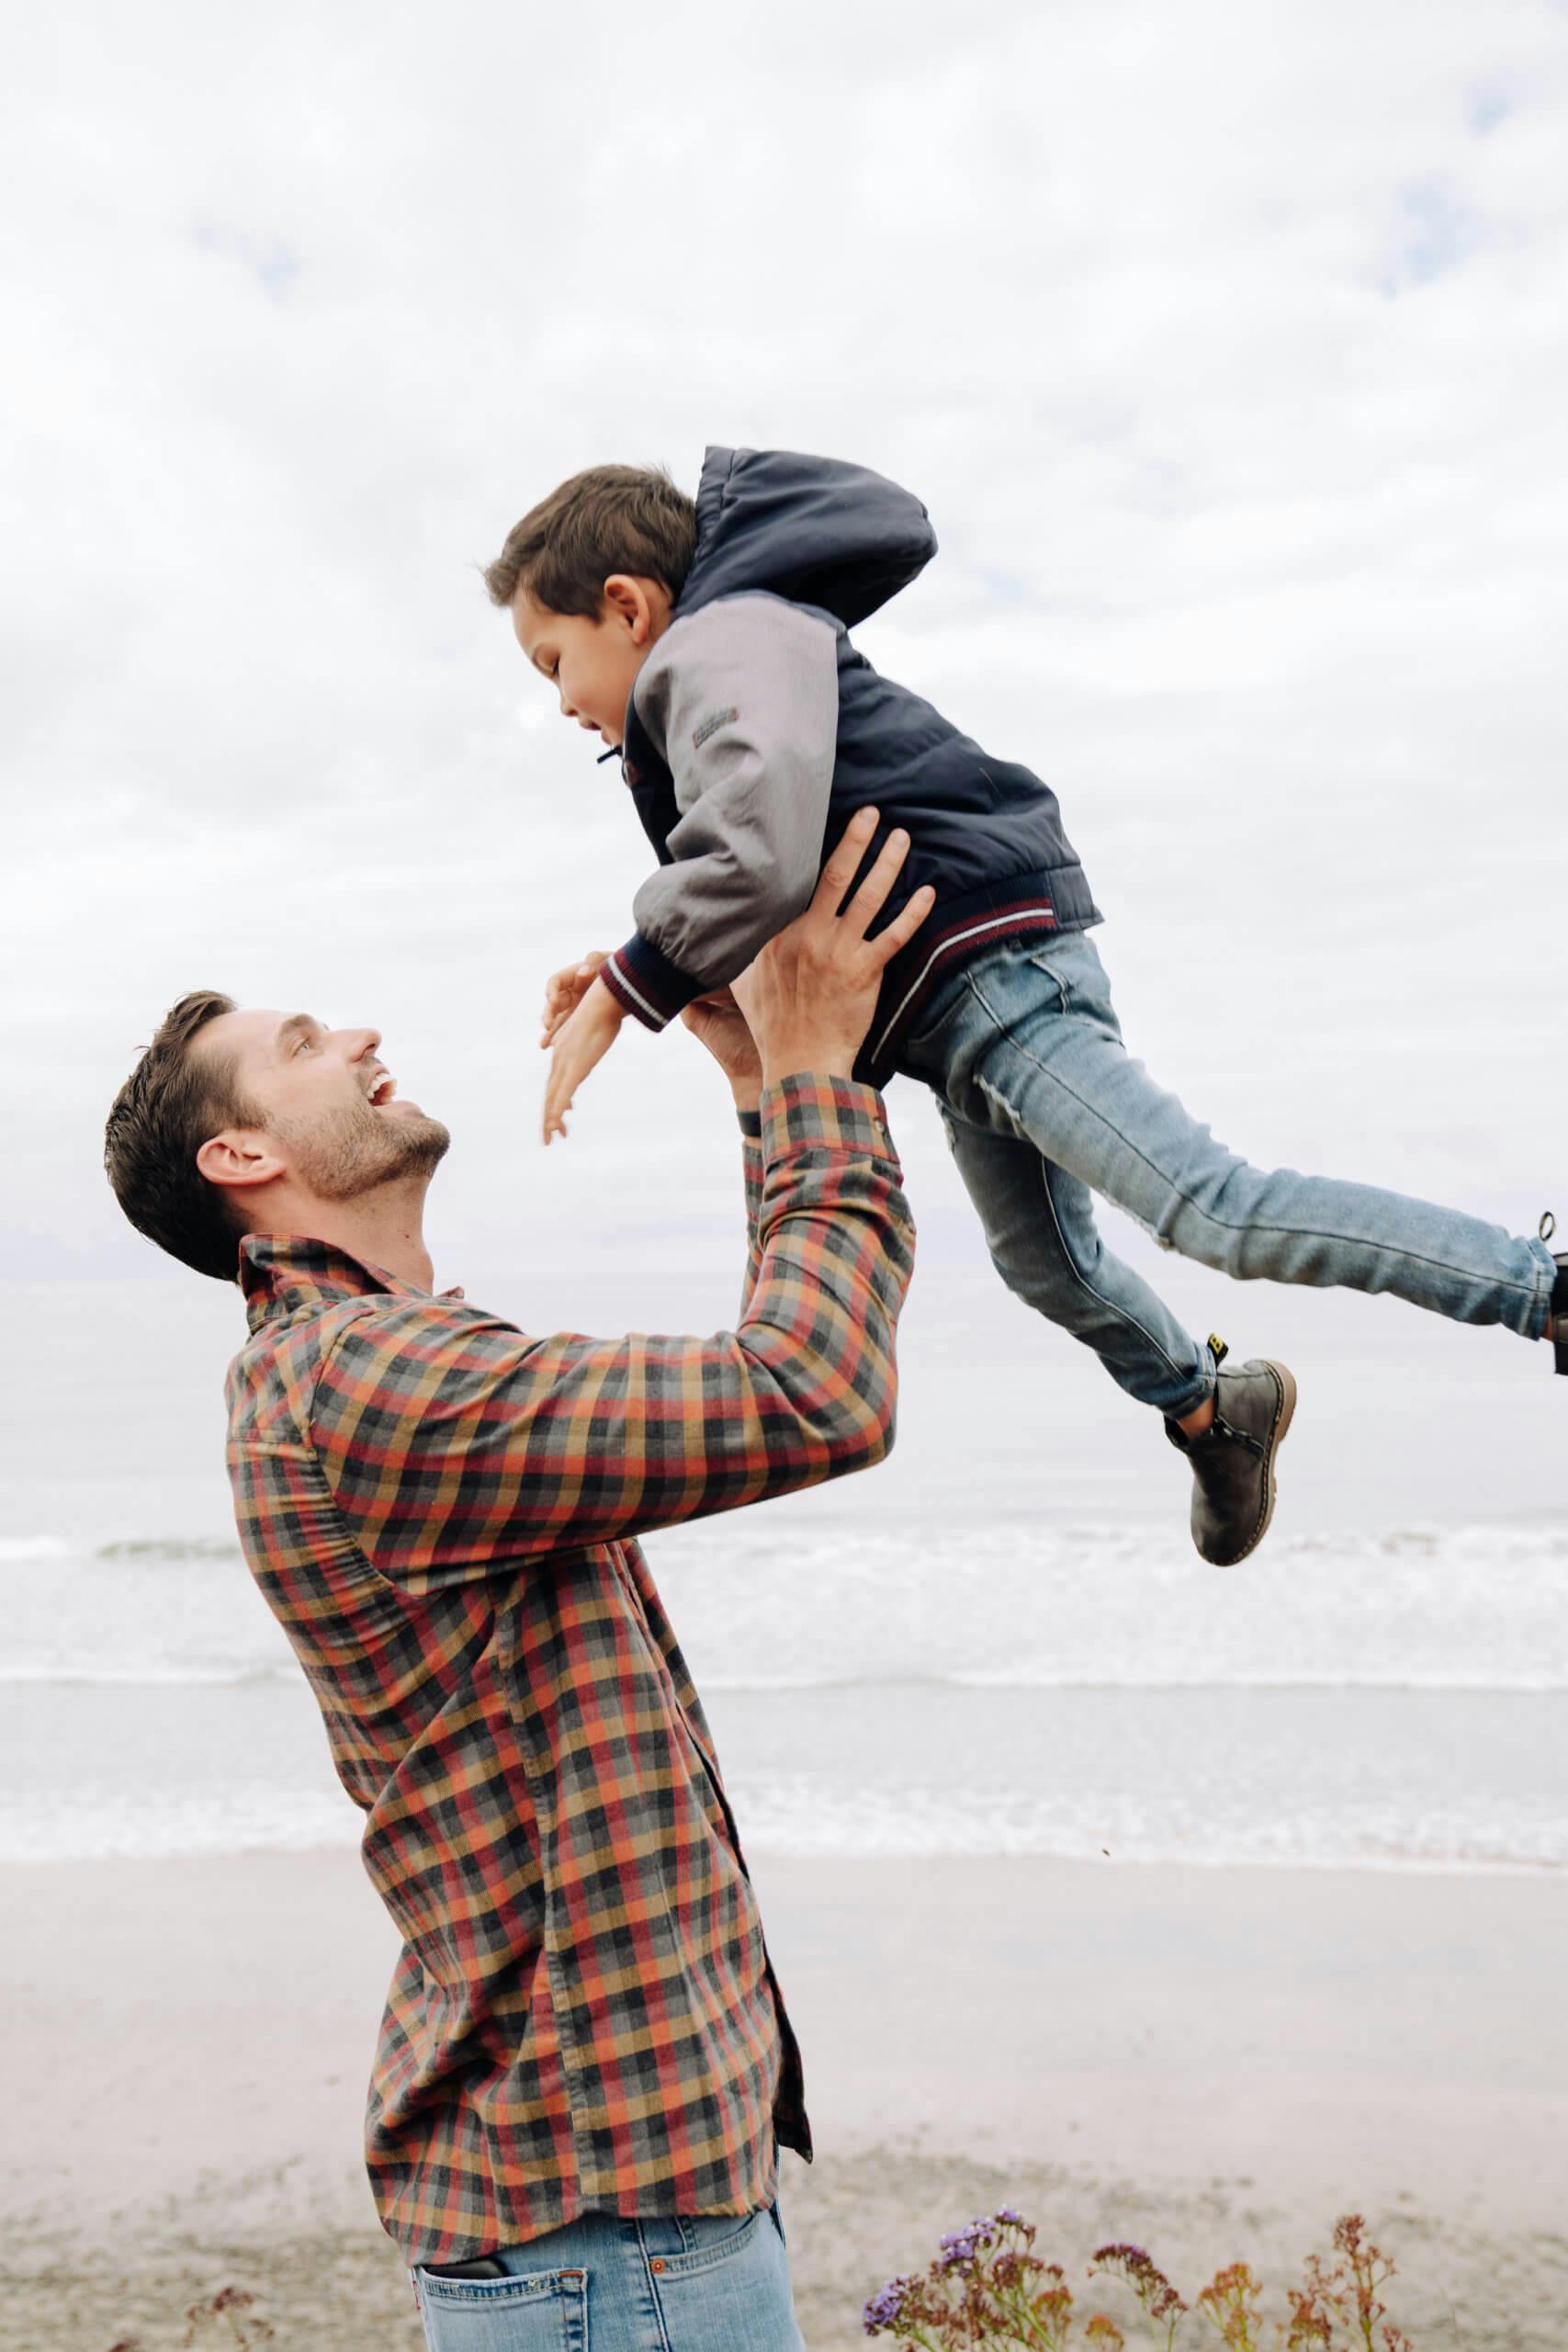 A man lifting a young boy into the air on a beach with overcast sky